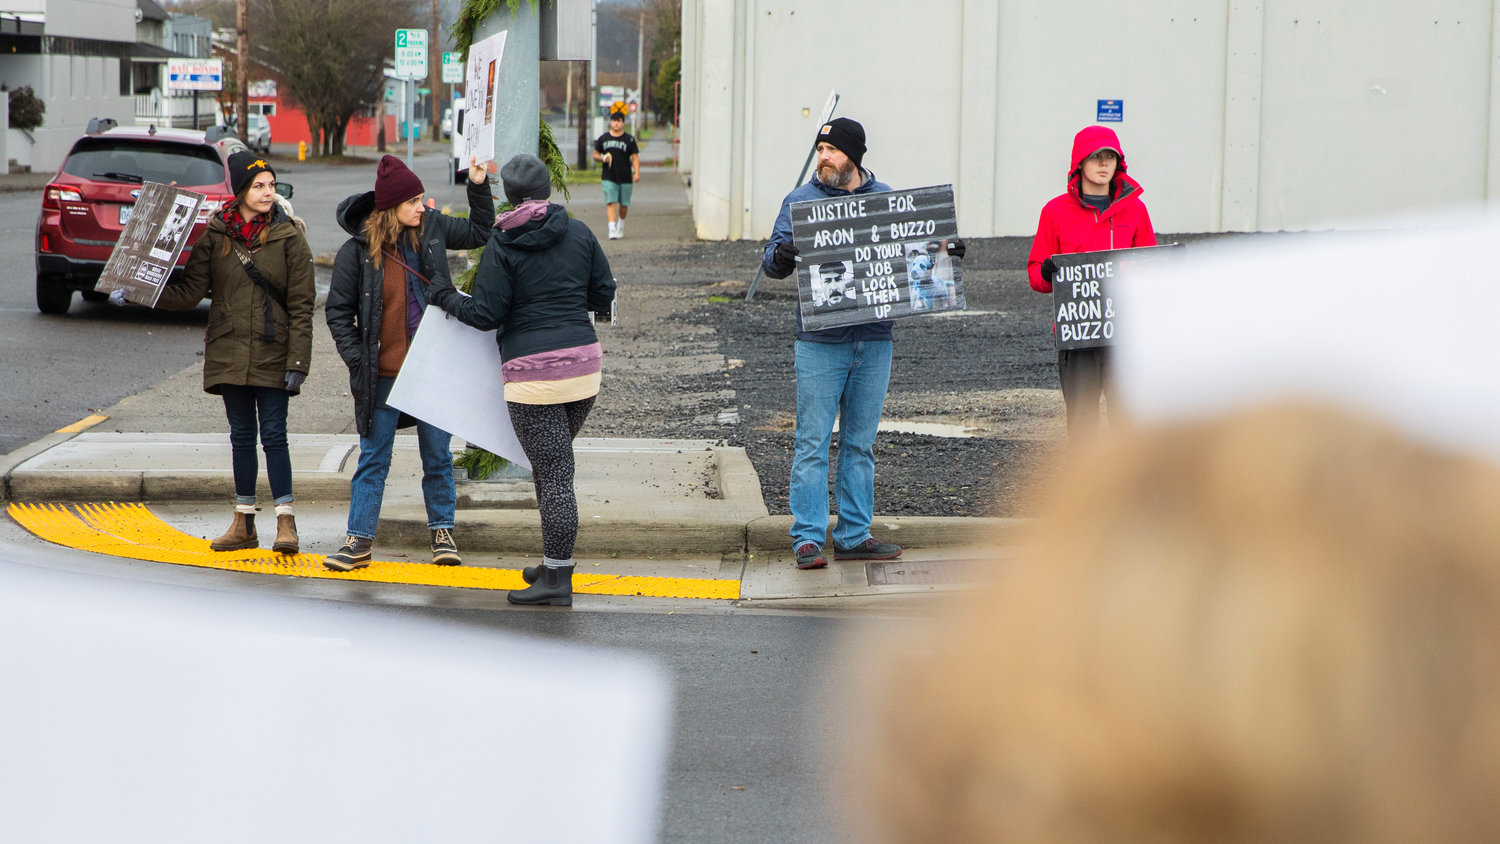 Friends of Aron Christensen hold signs outside the Lewis County Law and Justice Center while demanding justice in Chehalis on Sunday.